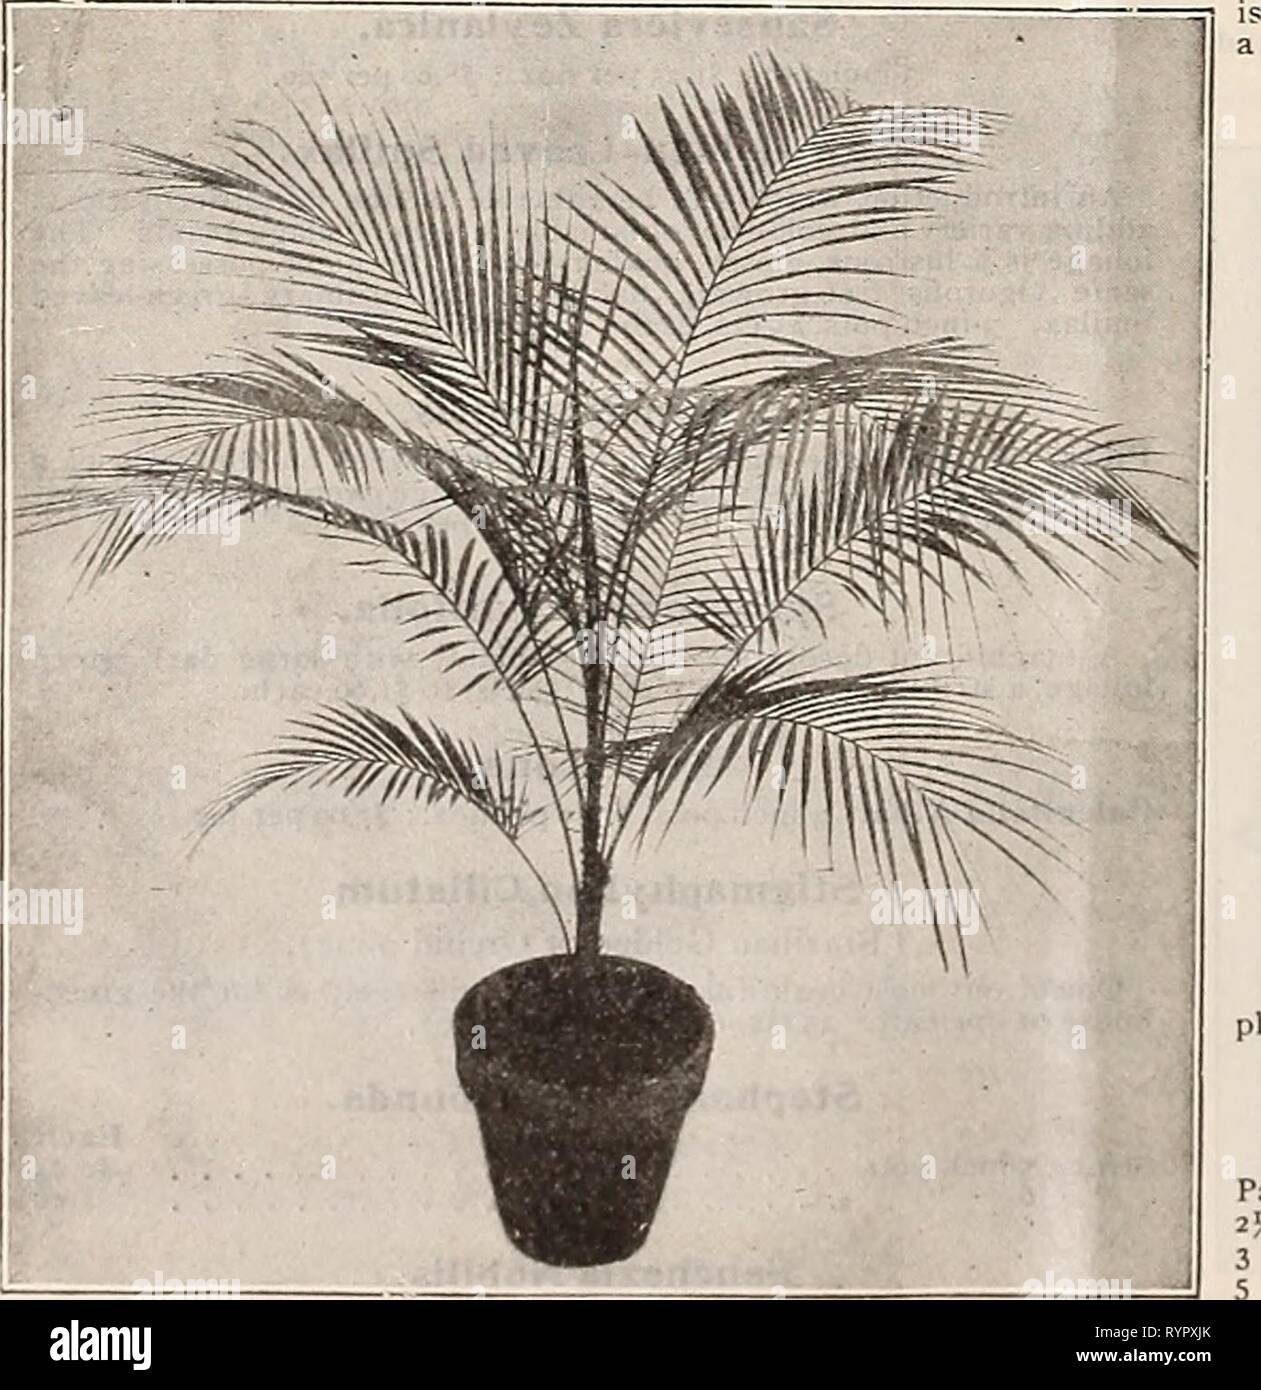 Dreer's wholesale price list  Dreer's wholesale price list : seeds for florists plants for florists bulbs for florists vegetable seeds, fungicides, fertilizers, insecticides, implements, sundries, etc . dreerswholesalep1911henr 0 Year: 1911  COCOS WKDDEI.IANA KENTIA KELMOREANA Areca Lutescens. A splendid lot of well-shaped plants, of good color. 25^-in. pots, 3 plants in a pot, 85 cts. per doz.; $6.00 per 100; $50.00 per 1000. 3-in.-pots, 3 plants in a pot, $1.25 per doz.; $10.00 per 1.00 ; $90.00 per 1000. 7-inch pots, 3 plants in a pot, 36 inches high, $2.00 each. 9- ' 3 ' ' 48 ' ' 4-oo ' Ar Stock Photo